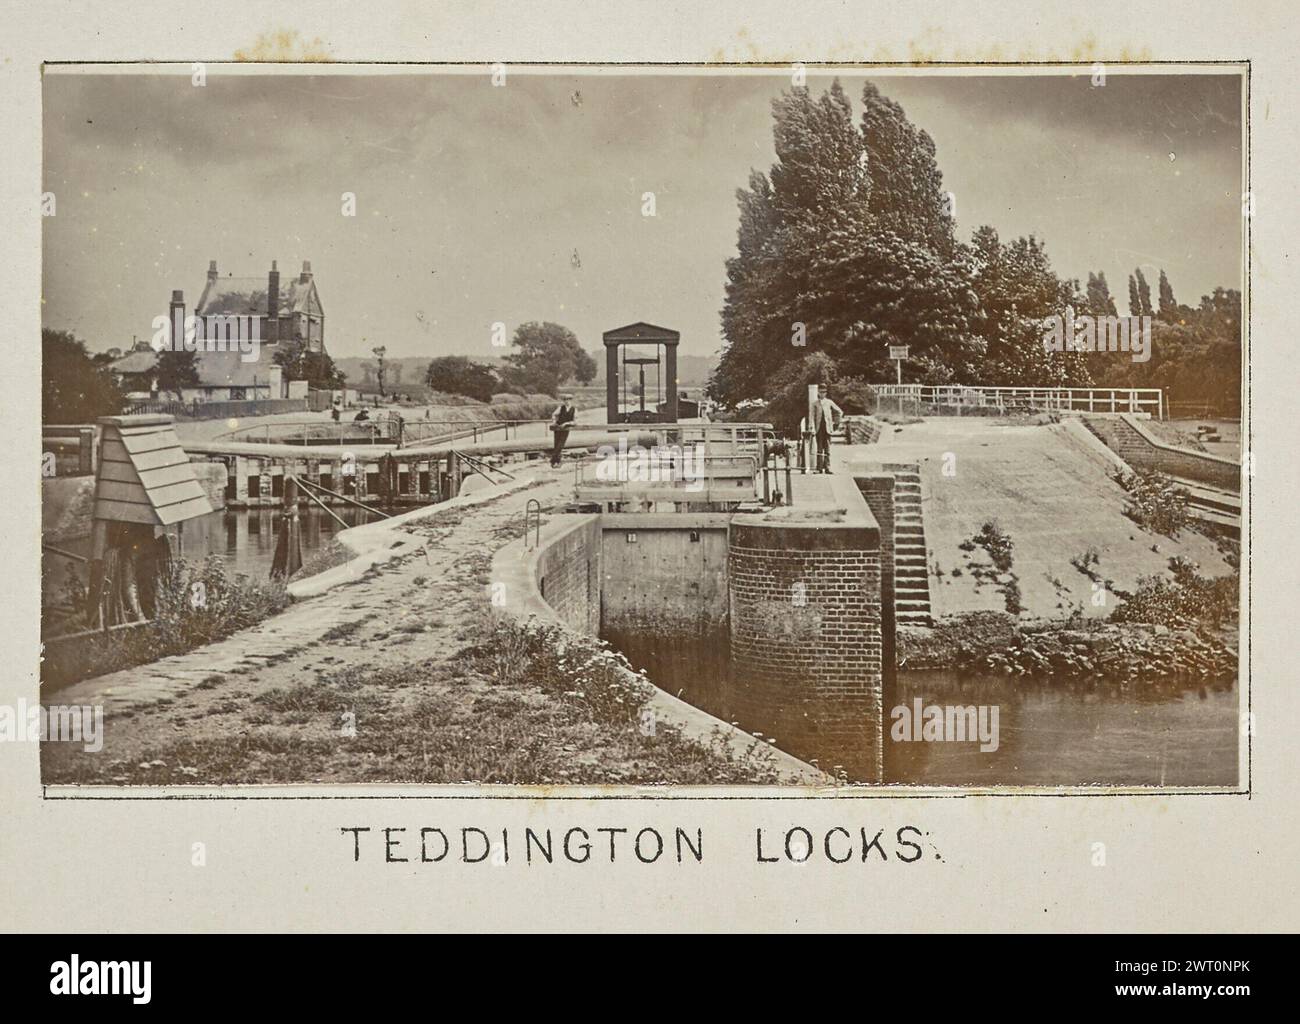 Teddington Locks. Henry W. Taunt, photographer (British, 1842 - 1922) 1897 One of three tipped-in photographs illustrating a printed map of Twickenham, Teddington, and the surrounding area along the River Thames. The photograph shows a view of the Teddington Lock on the river, with boats visible on the water in the background and a man standing on the lock leans against a railing. (Recto, mount) lower center, below image, printed in black ink: 'TEDDINGTON LOCKS.' Stock Photo